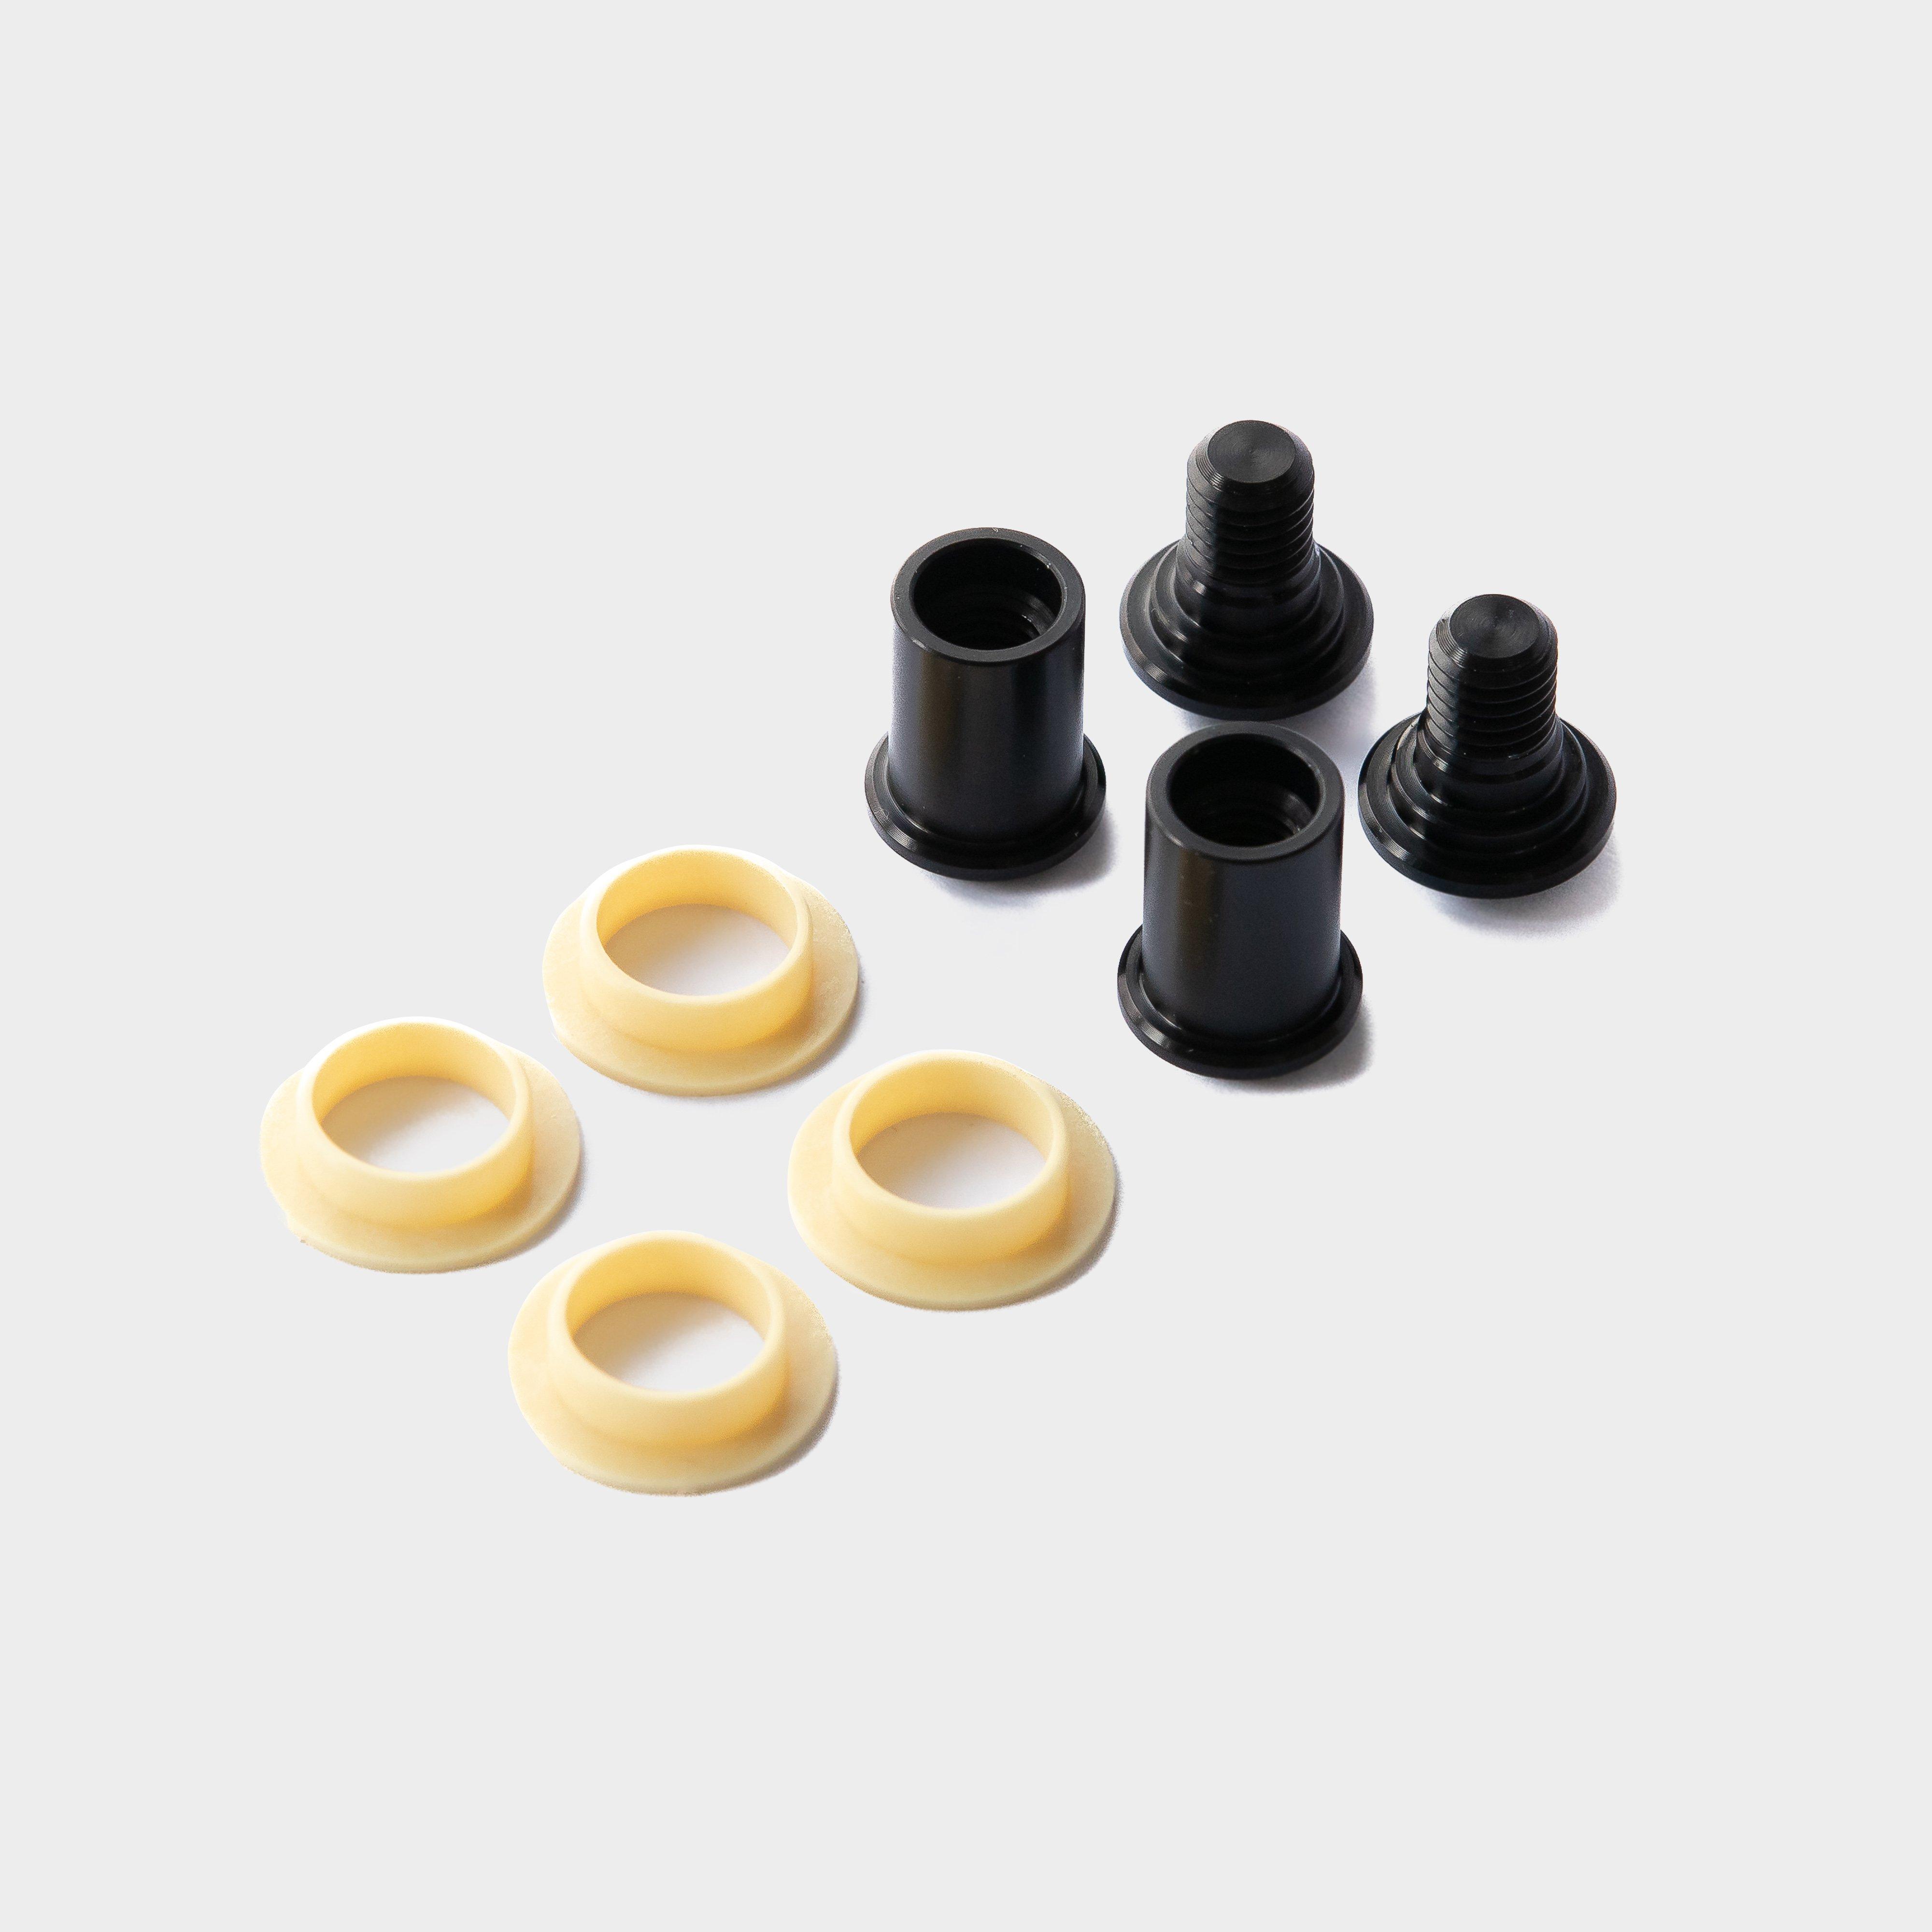 Calibre Calibre Sentry V2 Chainstay To Seatstay Bolt And Bushing Kit - Multi, Multi